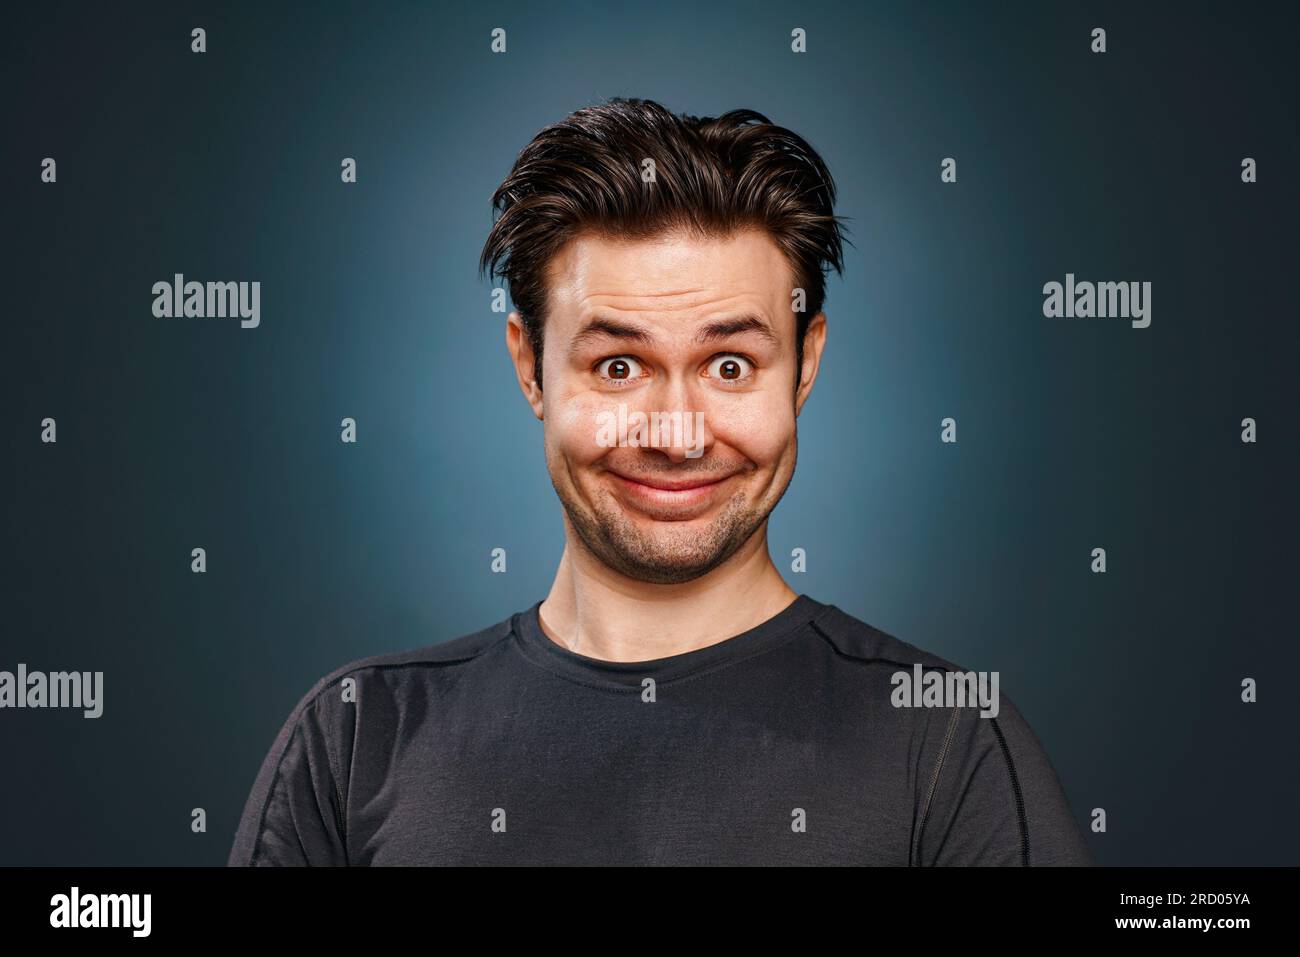 Young man silly smiling portrait Stock Photo